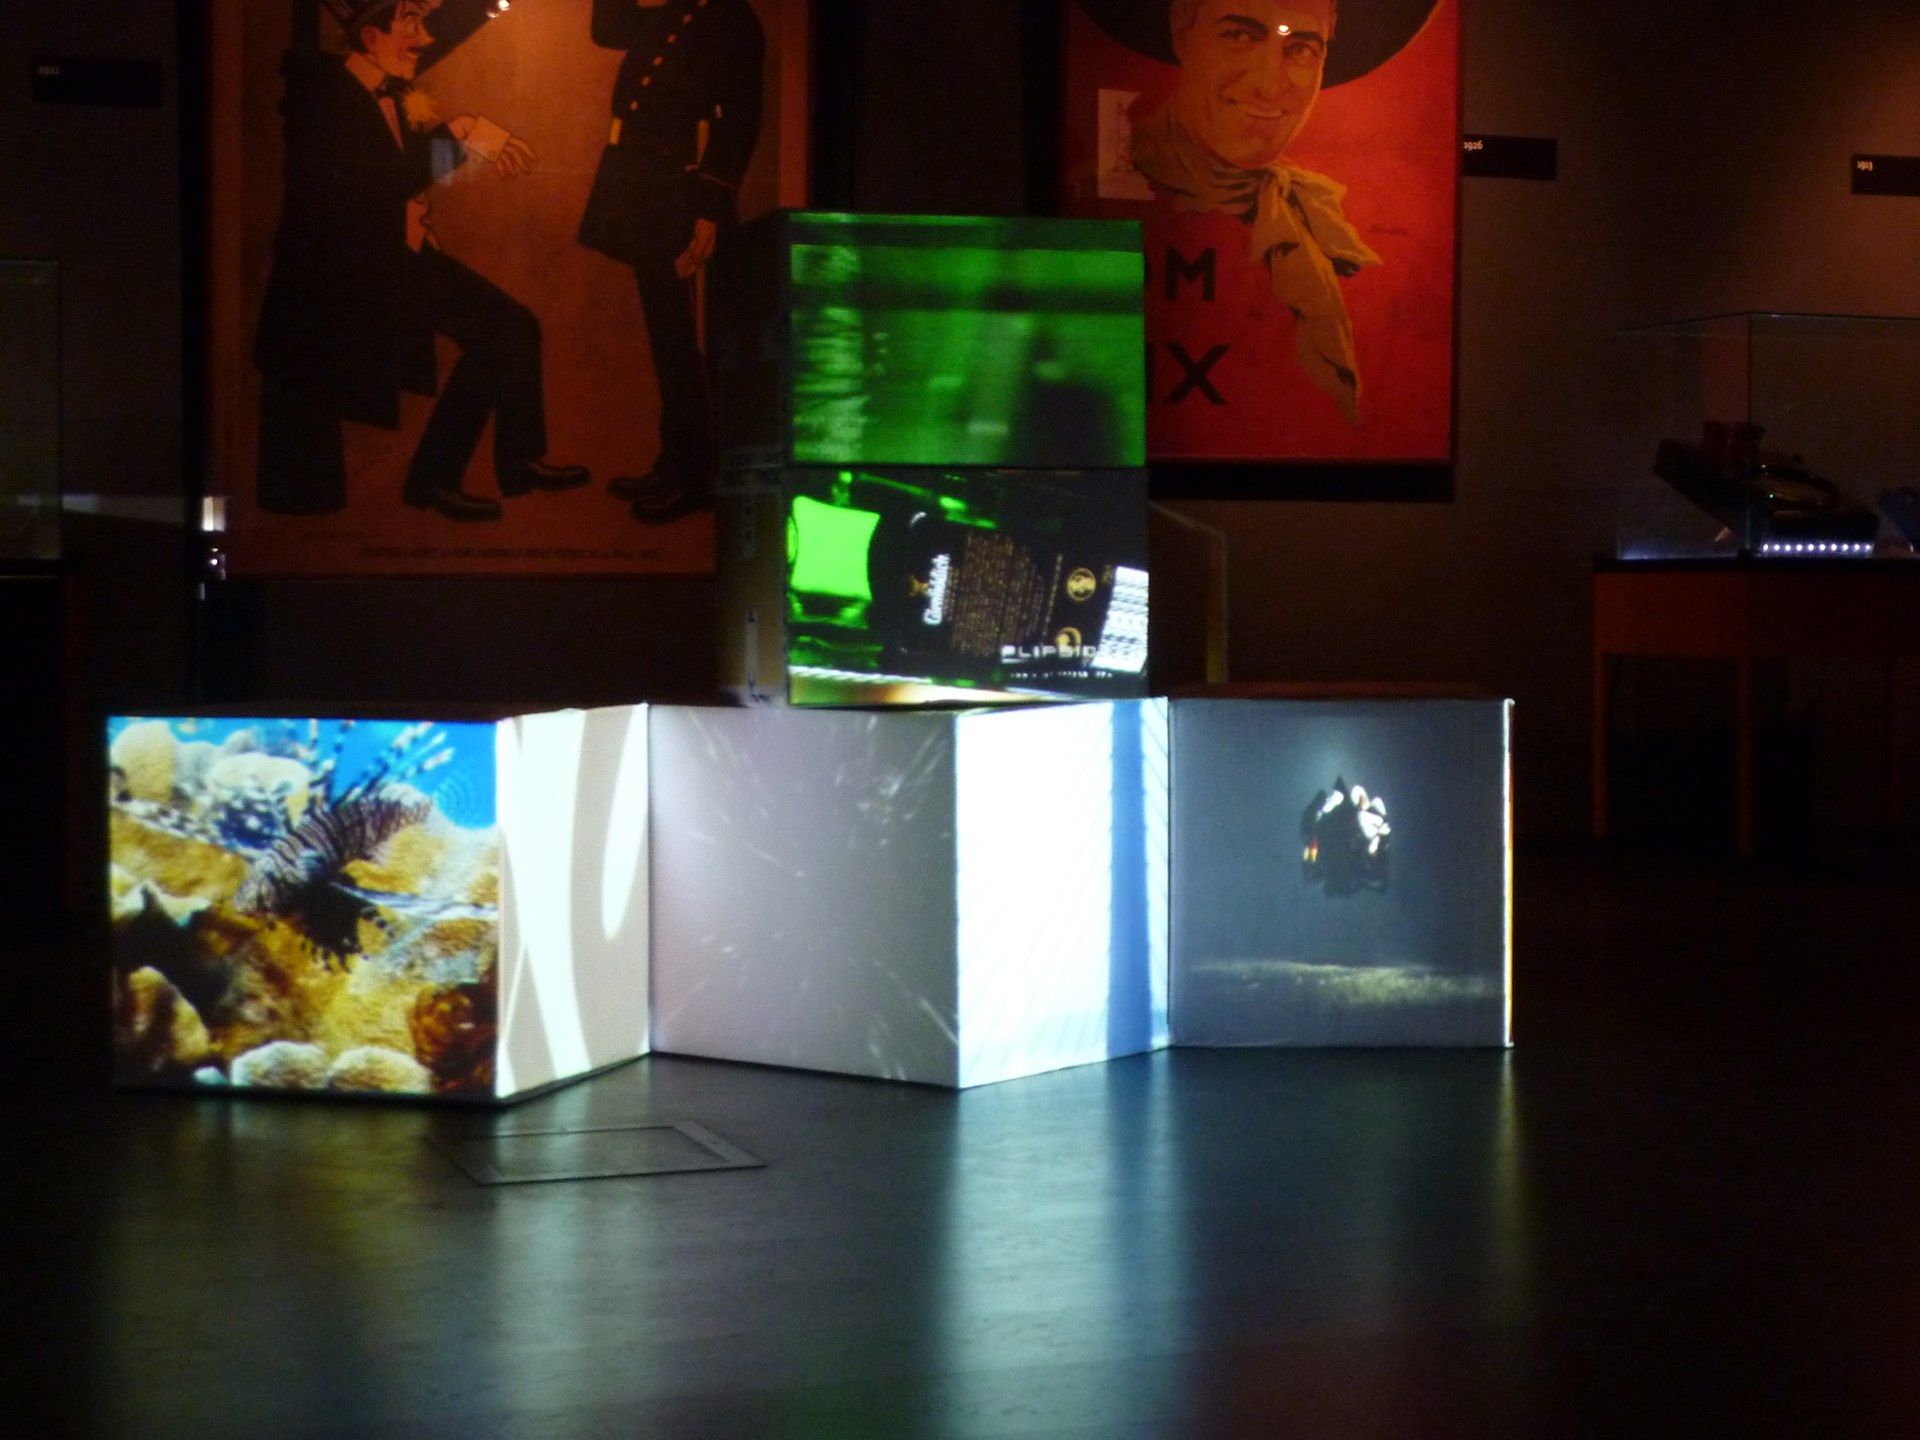 FaçadeSignage projection mapping with a single normal projector on some cardboard cubes.